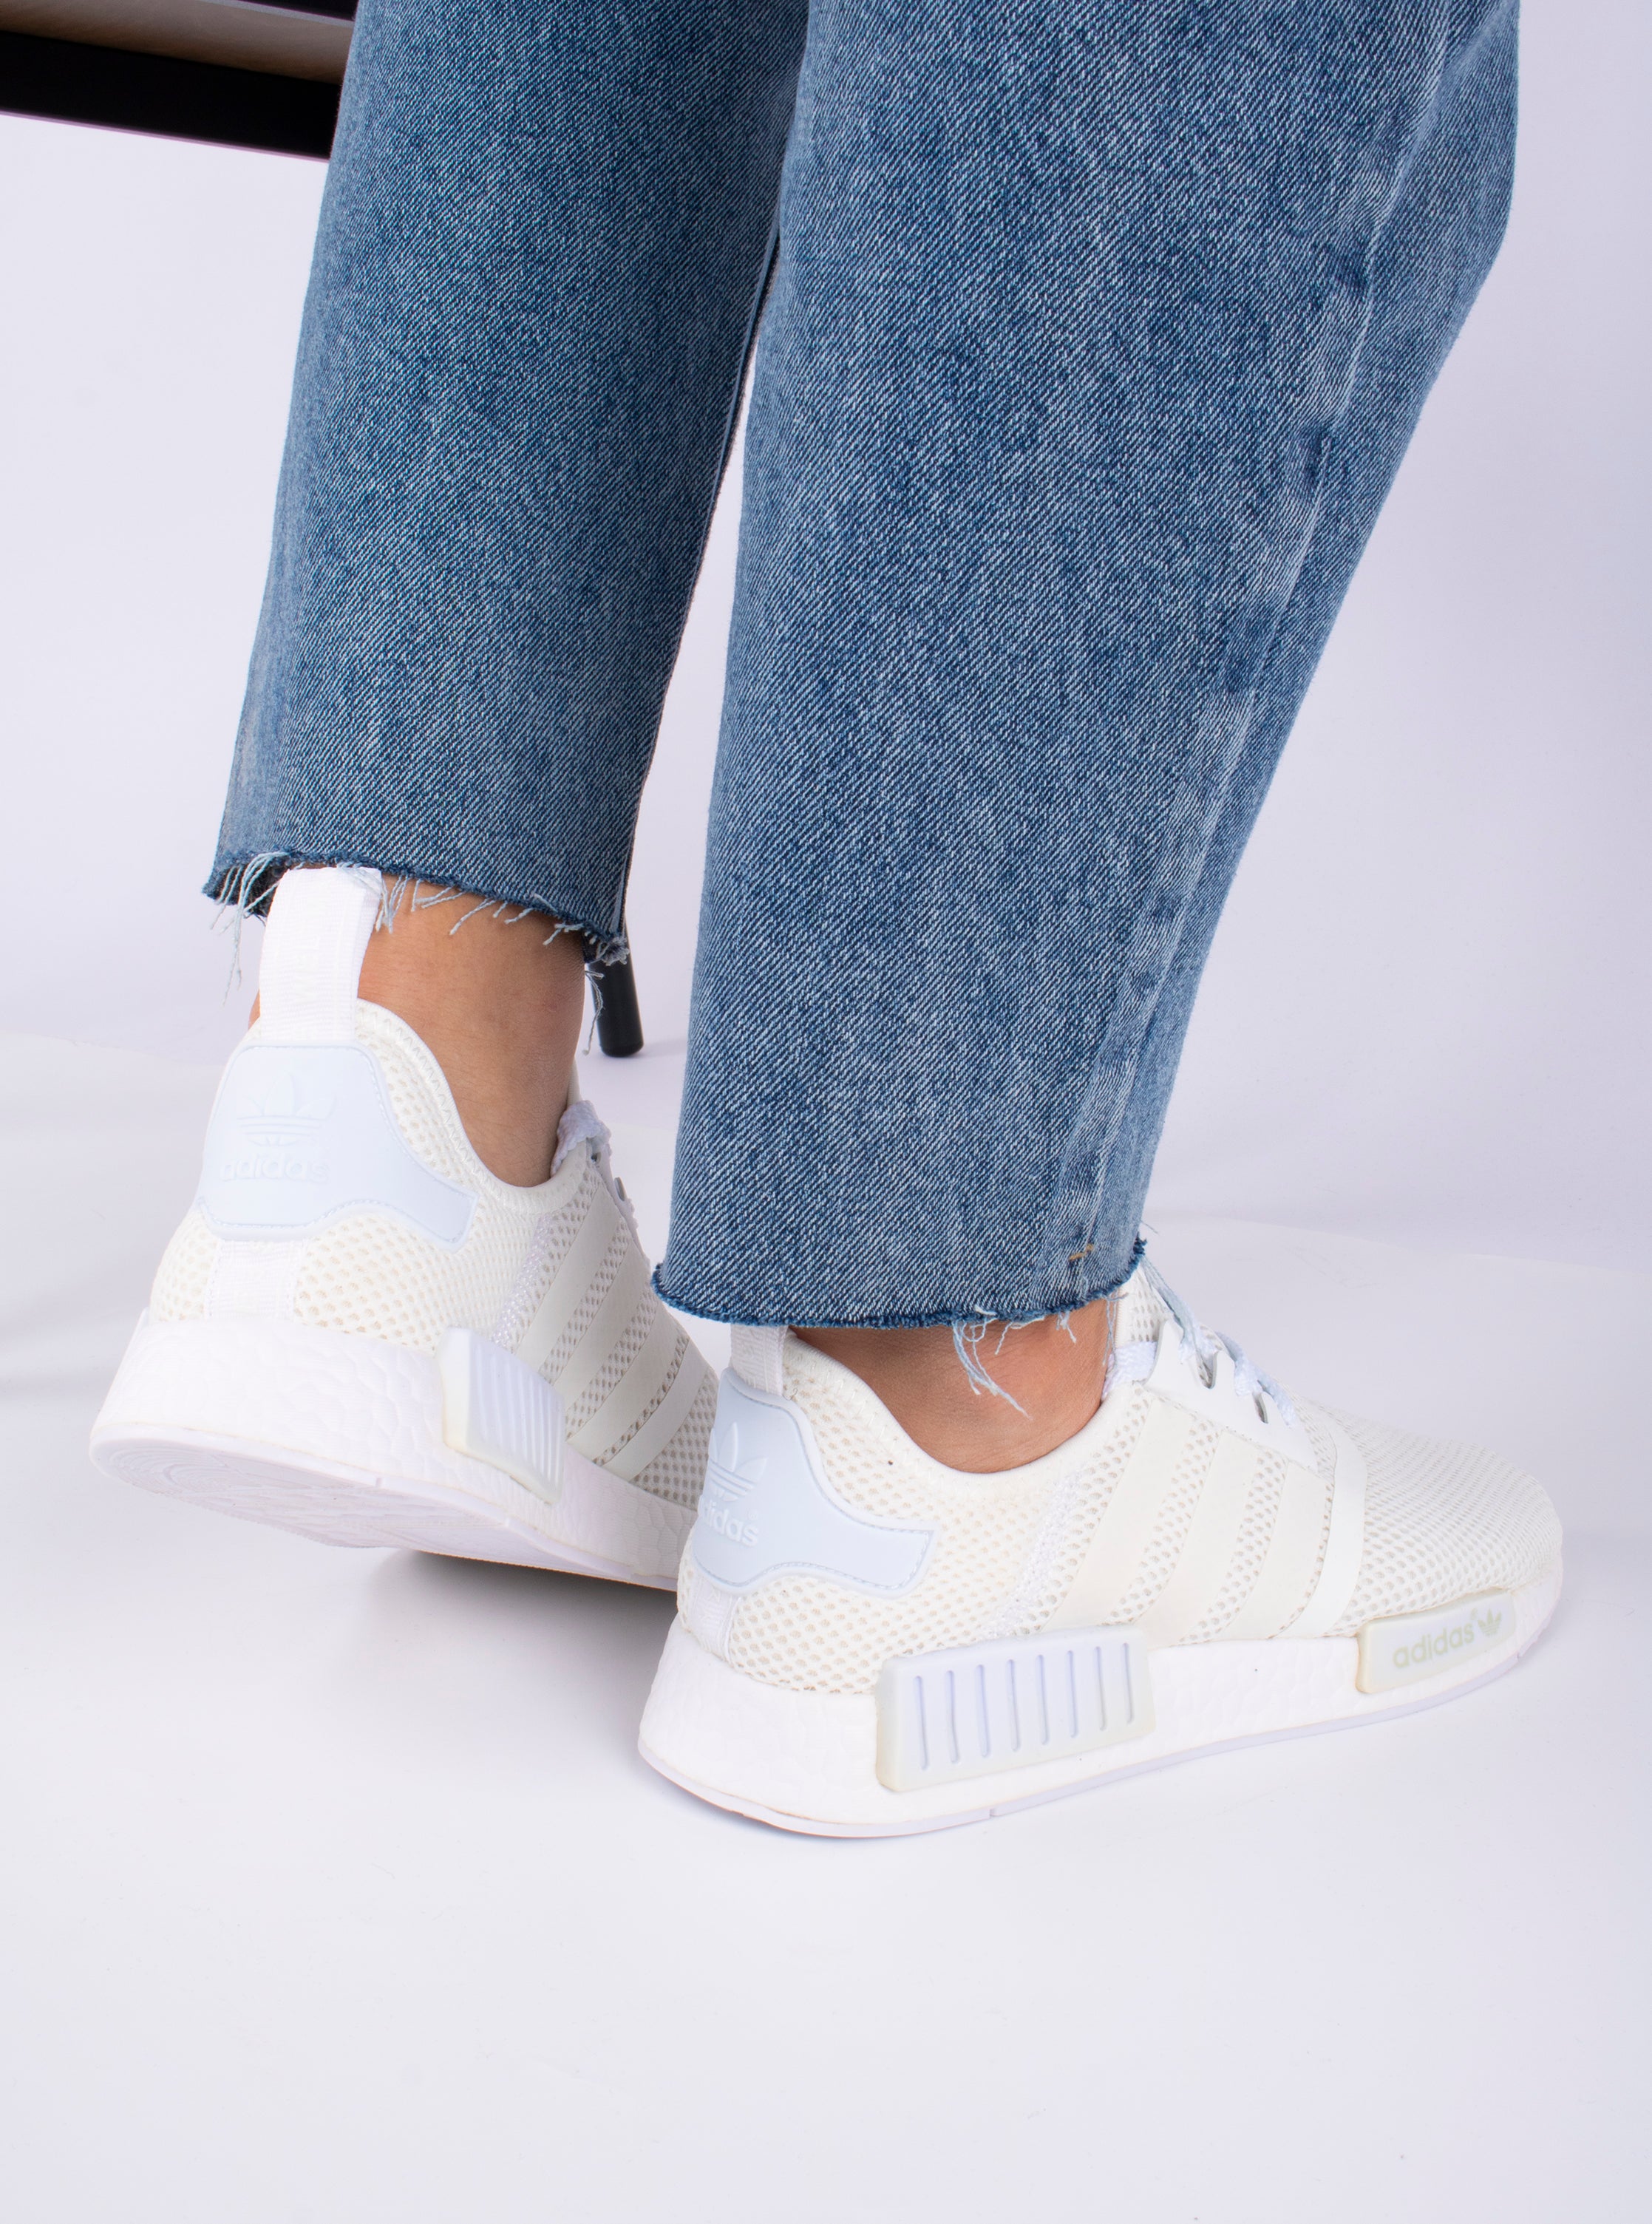 Adidas NMD All White